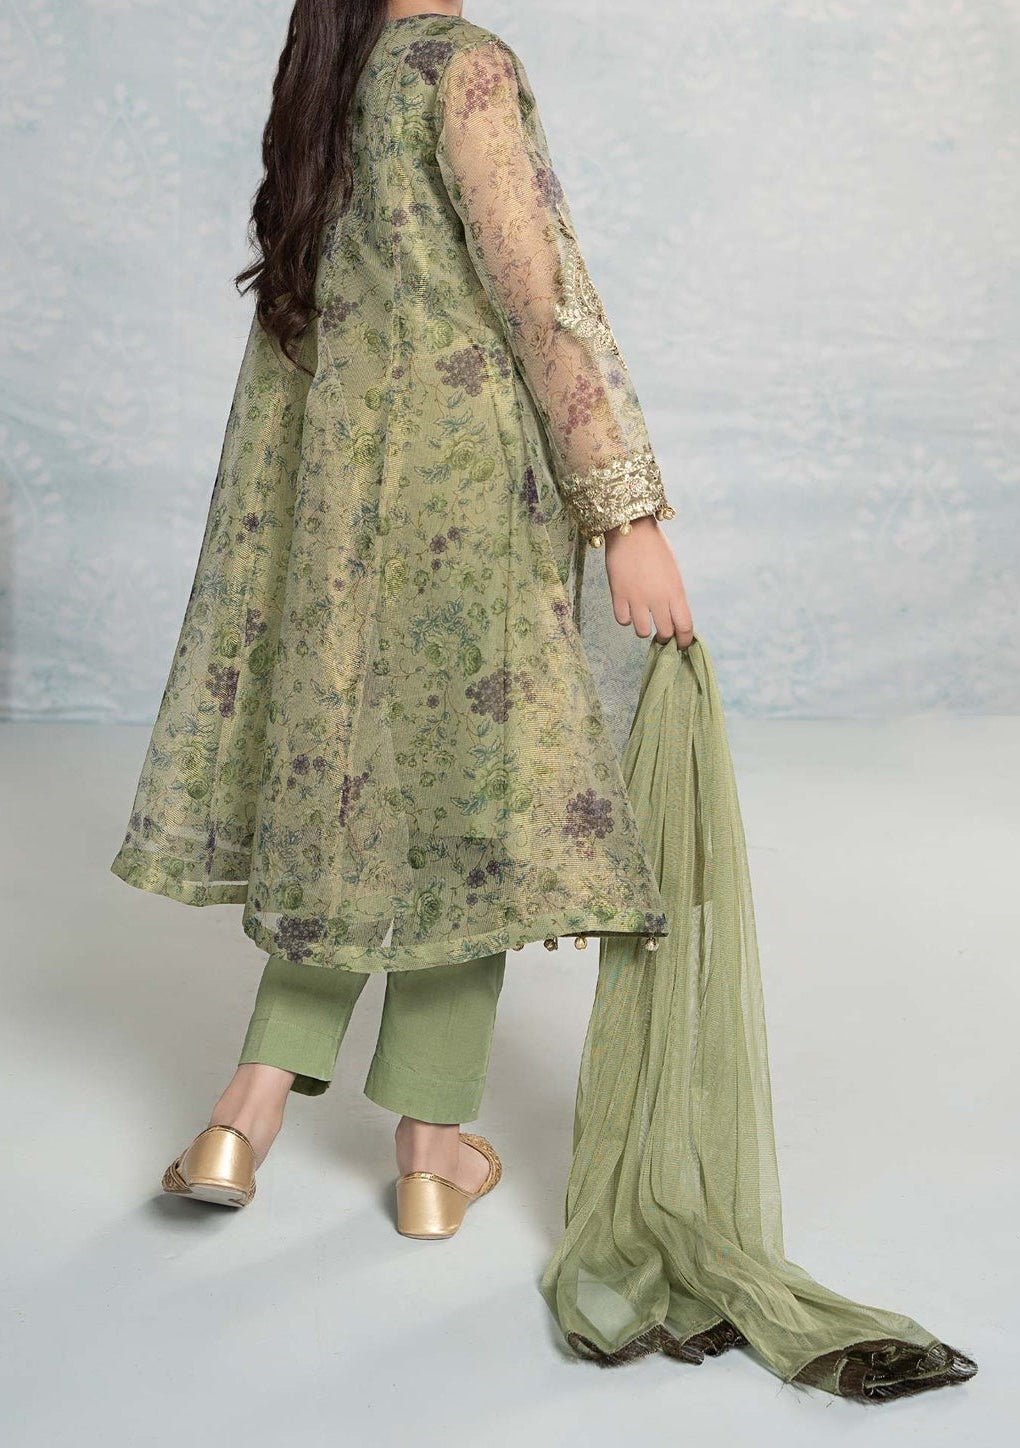 Maria.B Girl's Embroidered Net Salwar Suit - db25401